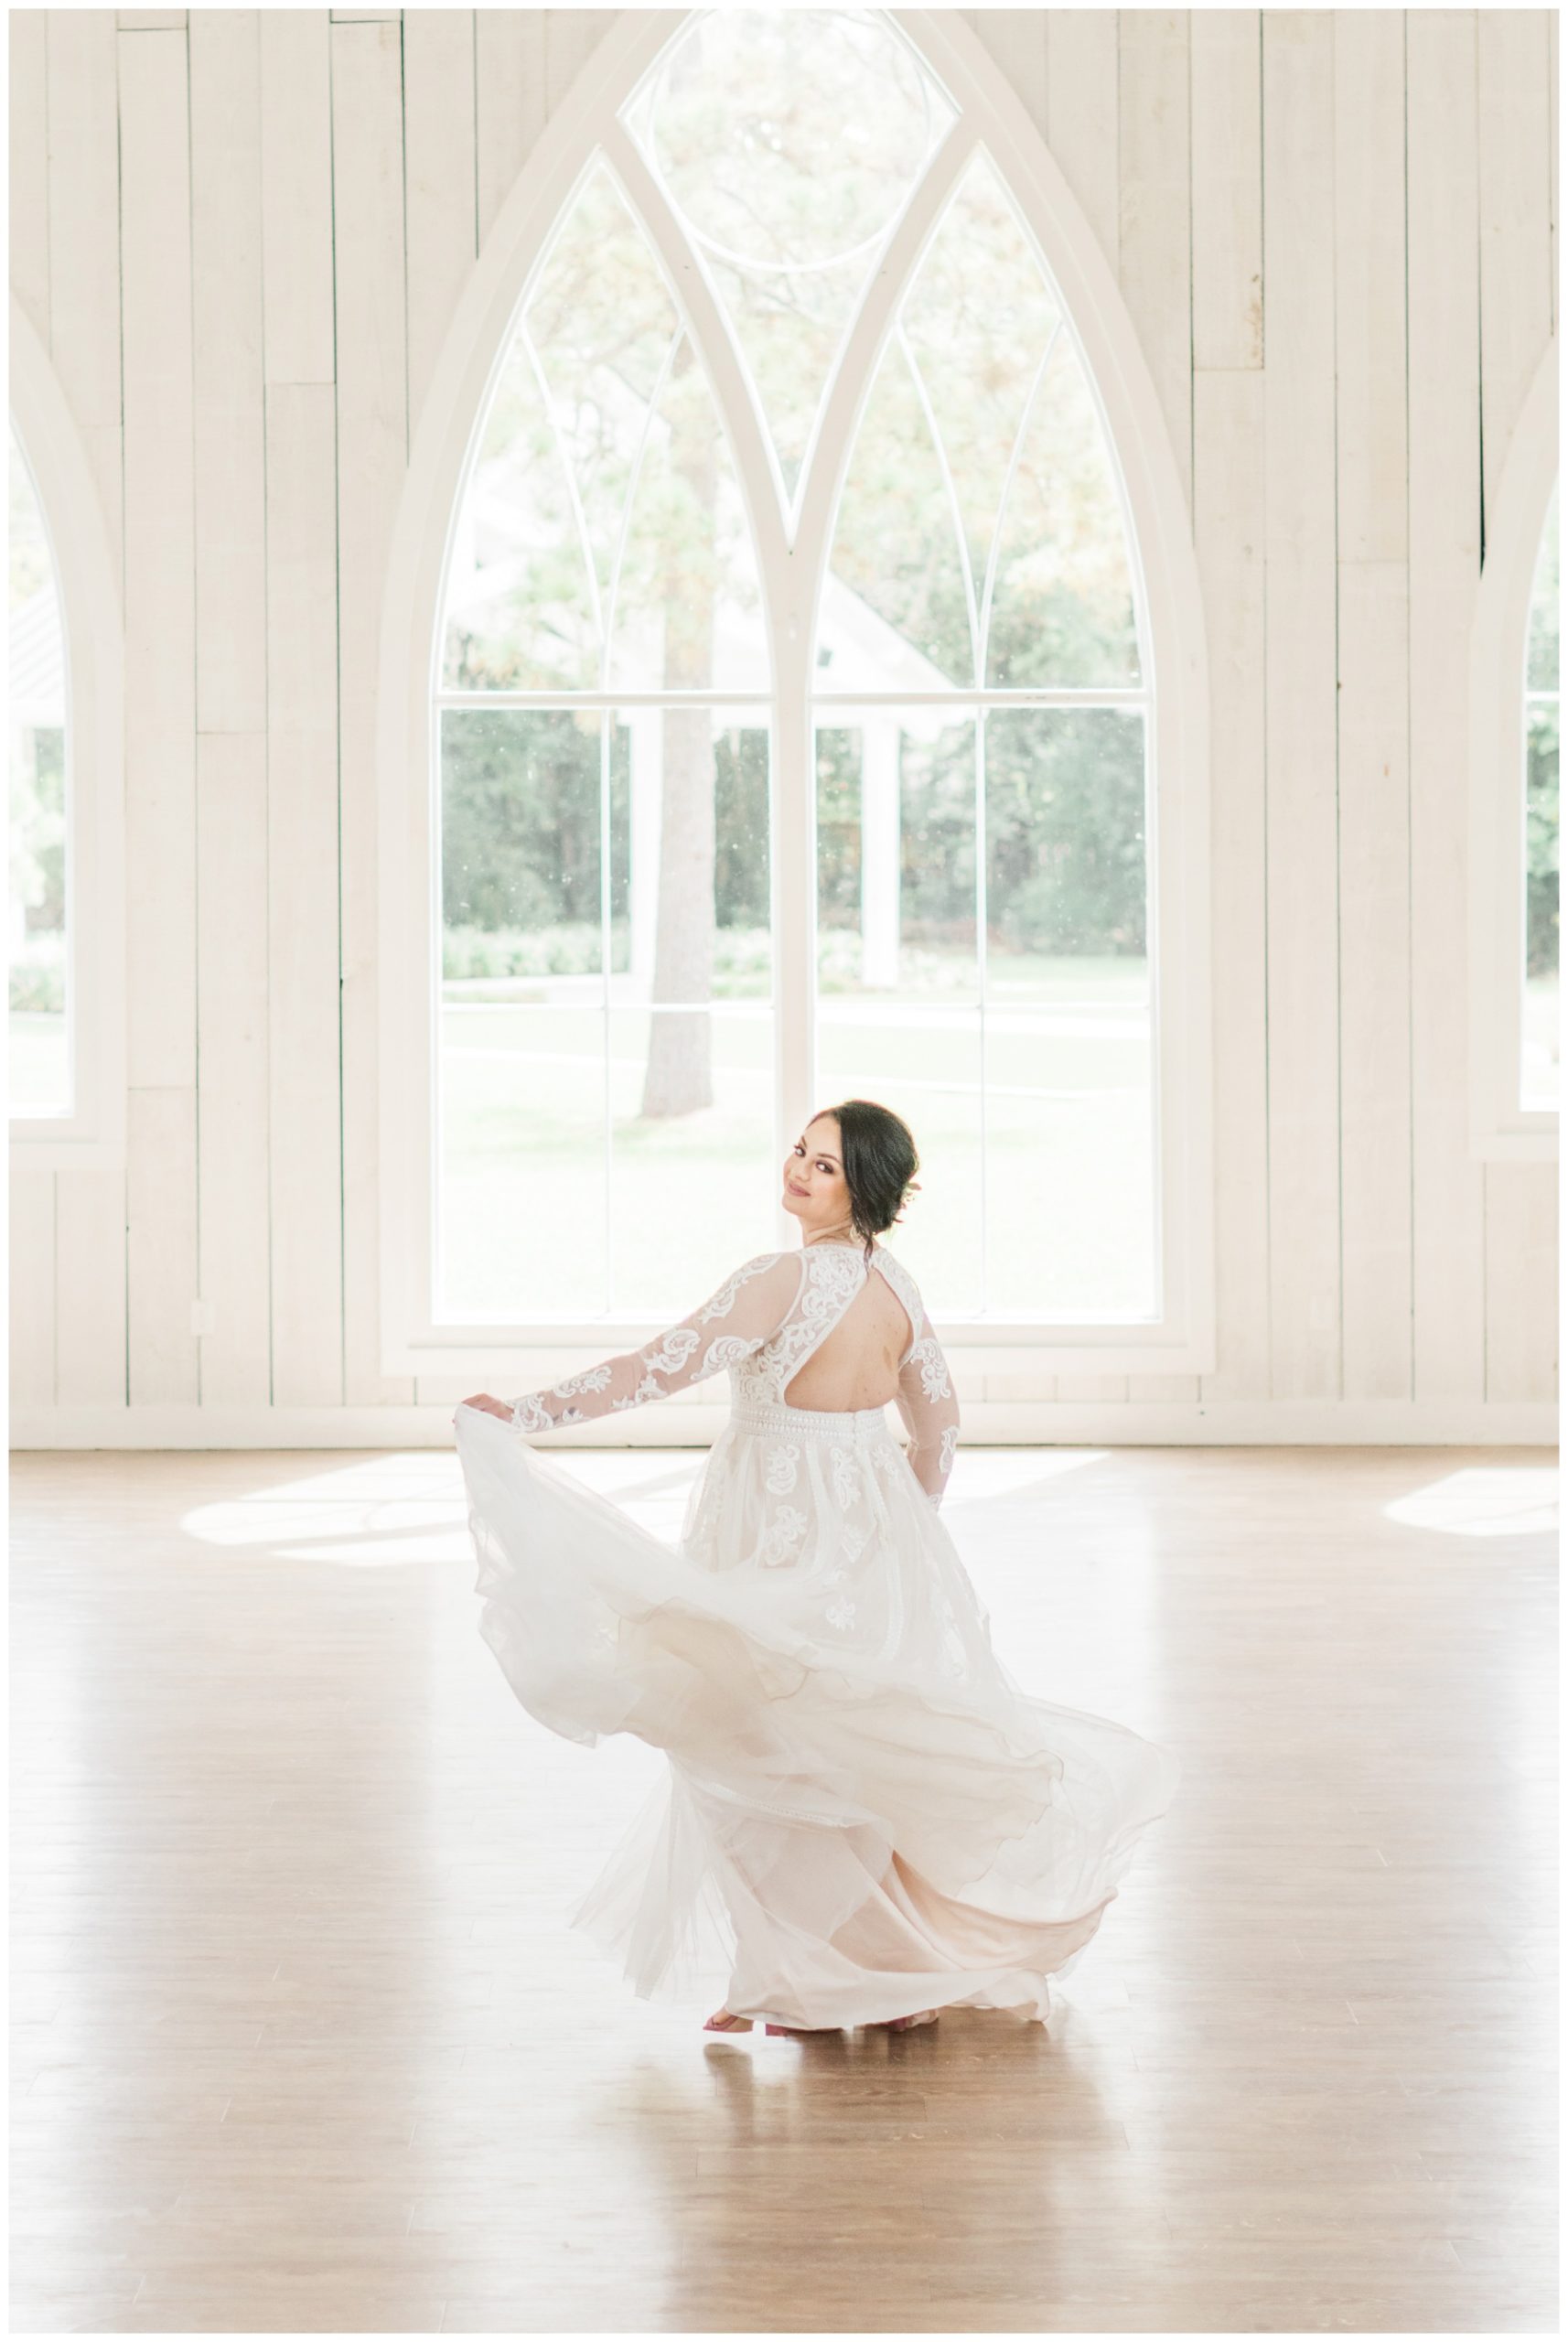 Indoor bridal session at The Springs in Wallisville